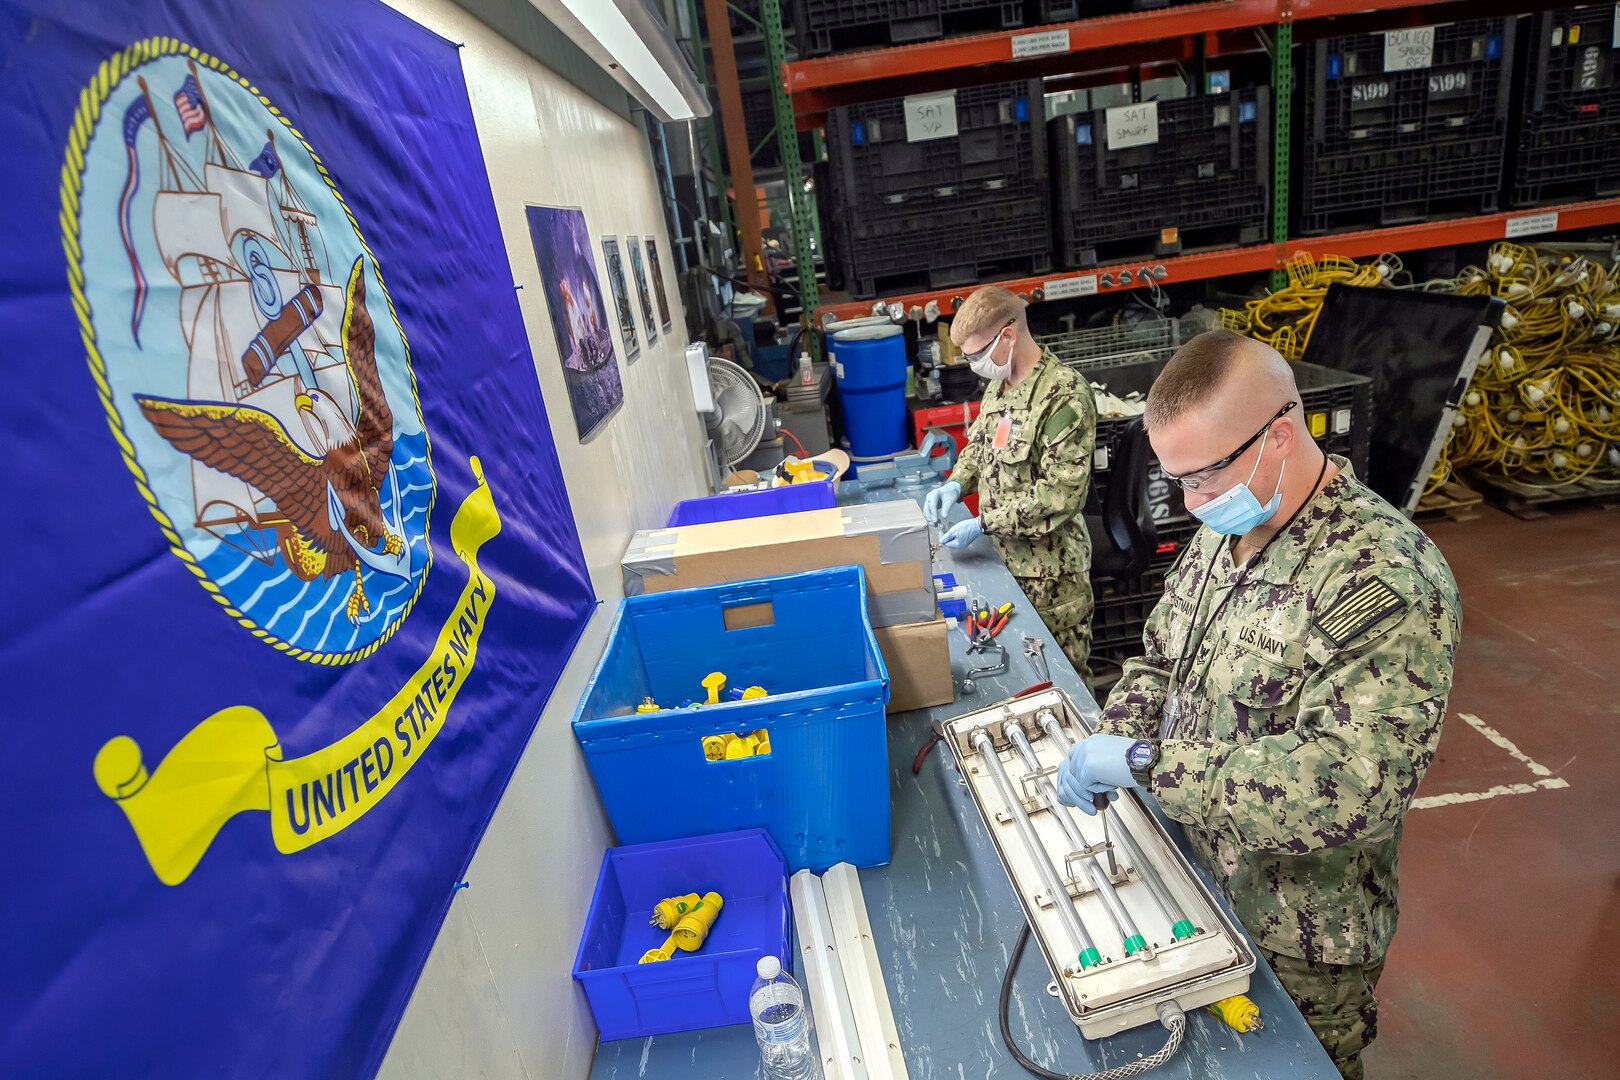 SurgeMain Reservists recycle LED light fixtures while working  at Puget Sound Naval Shipyard & Intermediate Maintenance Facility in Bremerton, Washington.